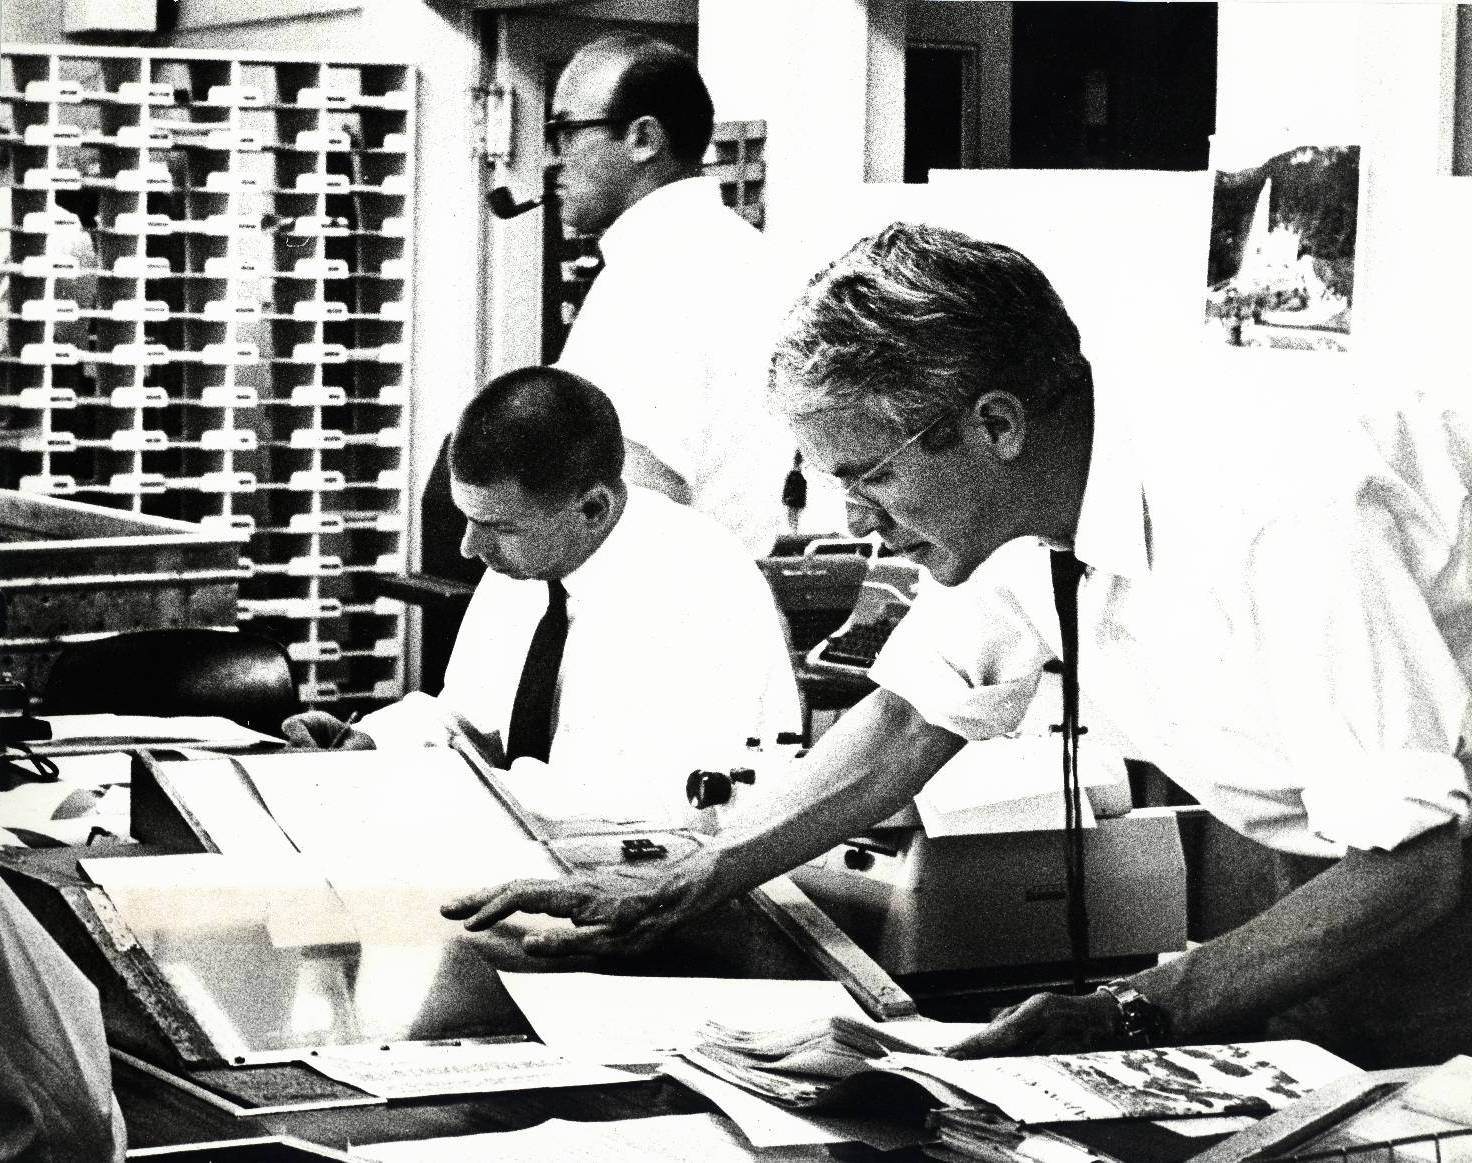 RFE COVERS THE MIDDLE EASET CRISIS -- At work in RFE's Central News Room during the Arab-Israeli war: (from left) Editor Arthur Breslauer, Assistant NEws Director Tom Bodin and Deputy CNR Chief Brian McGill. June 1967.